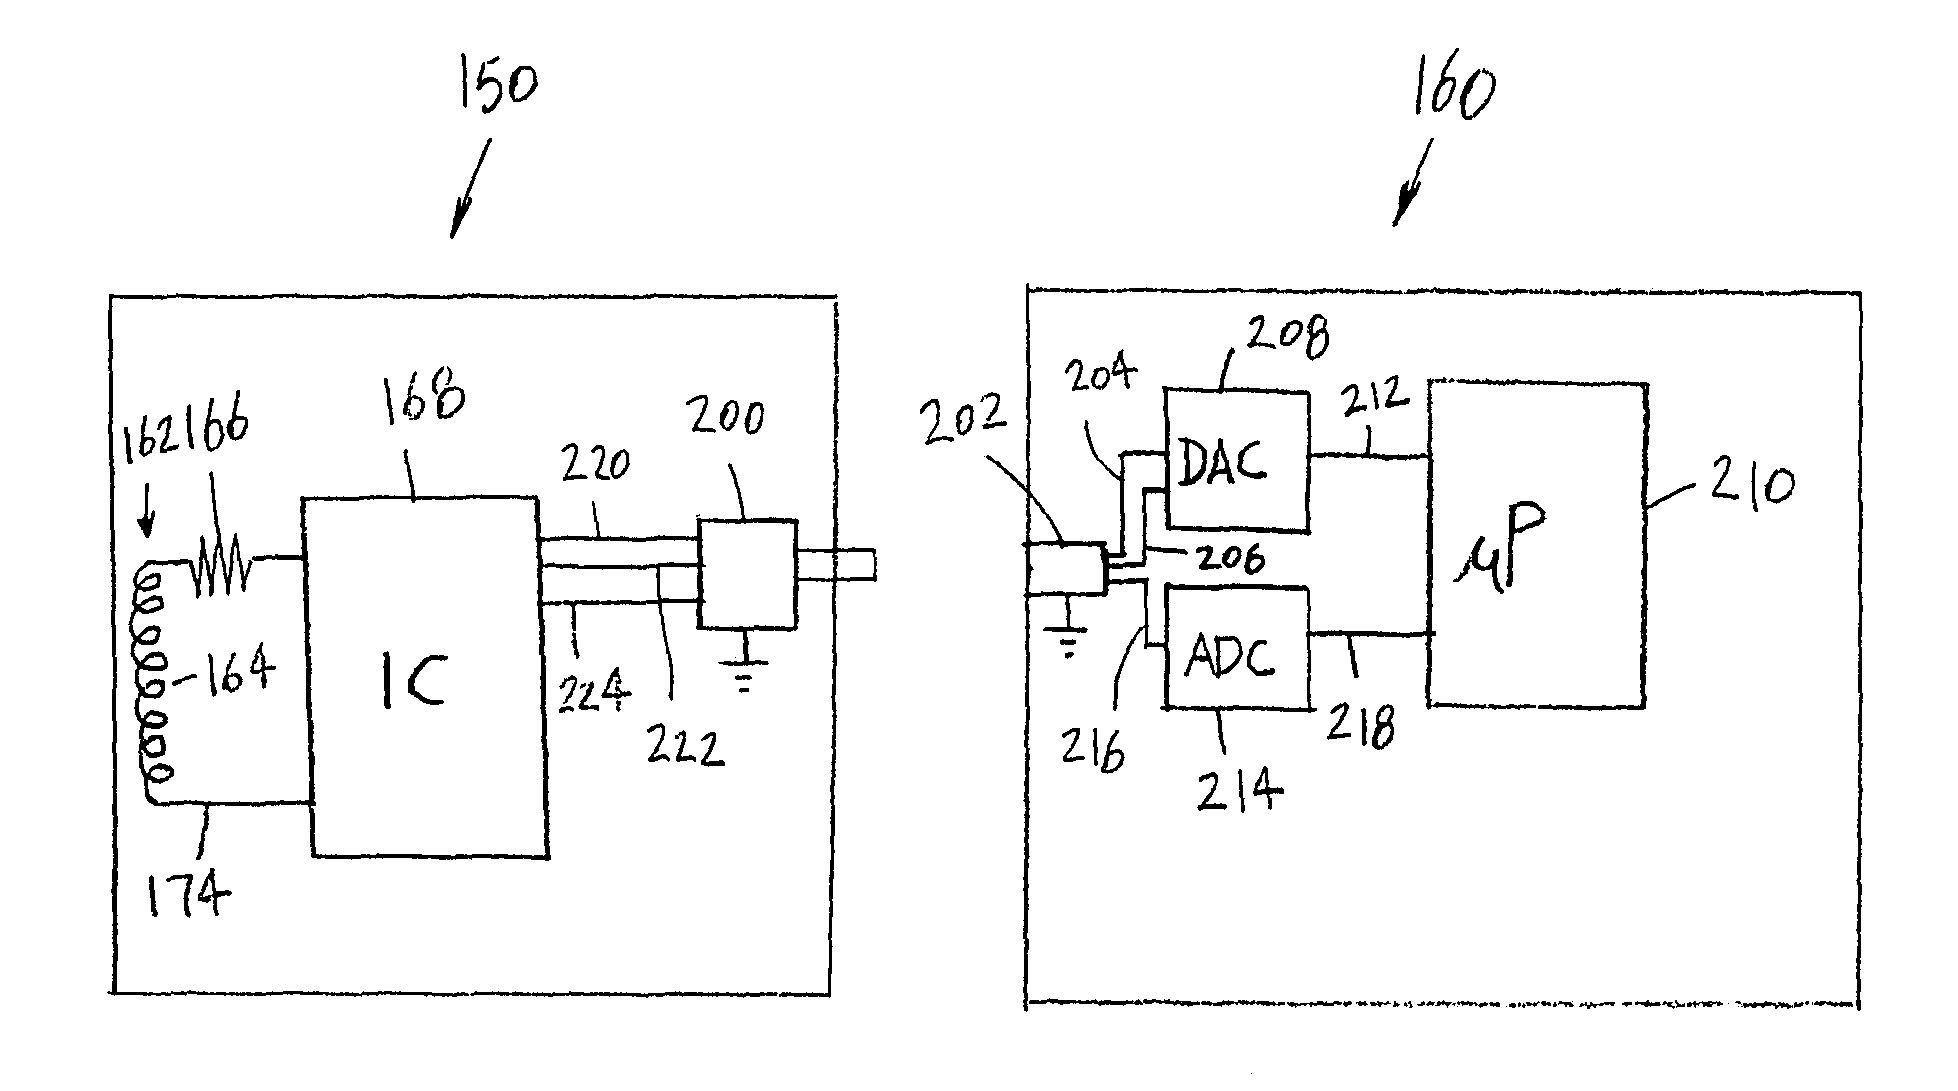 Card reader device and method of use